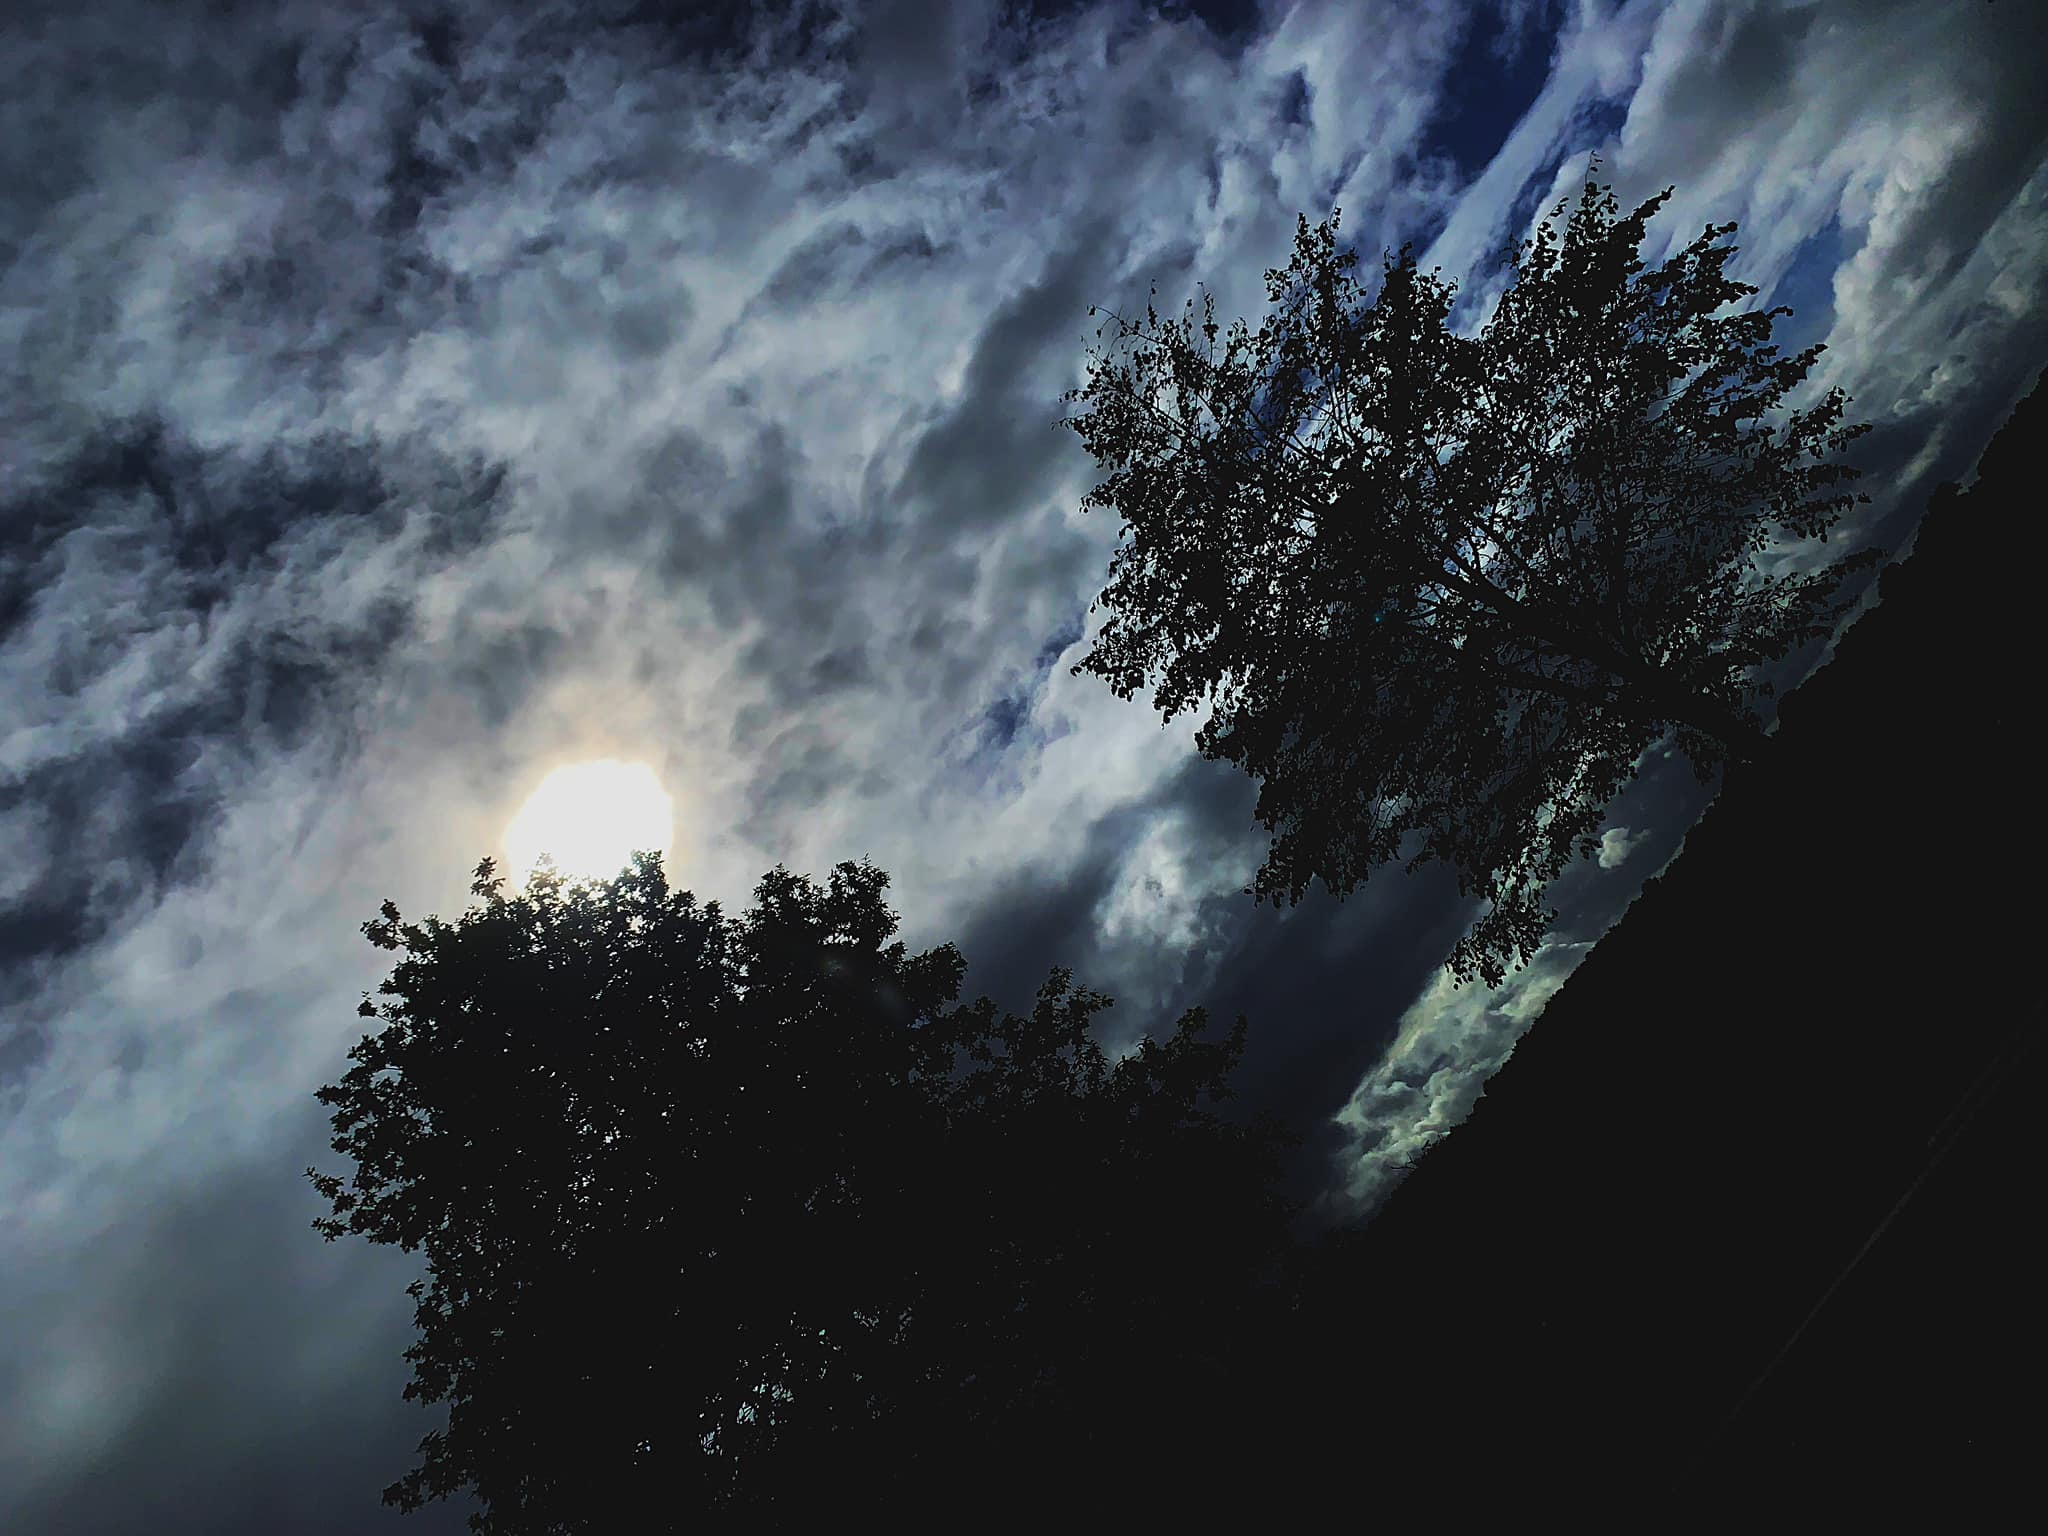 Spooky skies in Knutsford by Carly Jo Curbishley